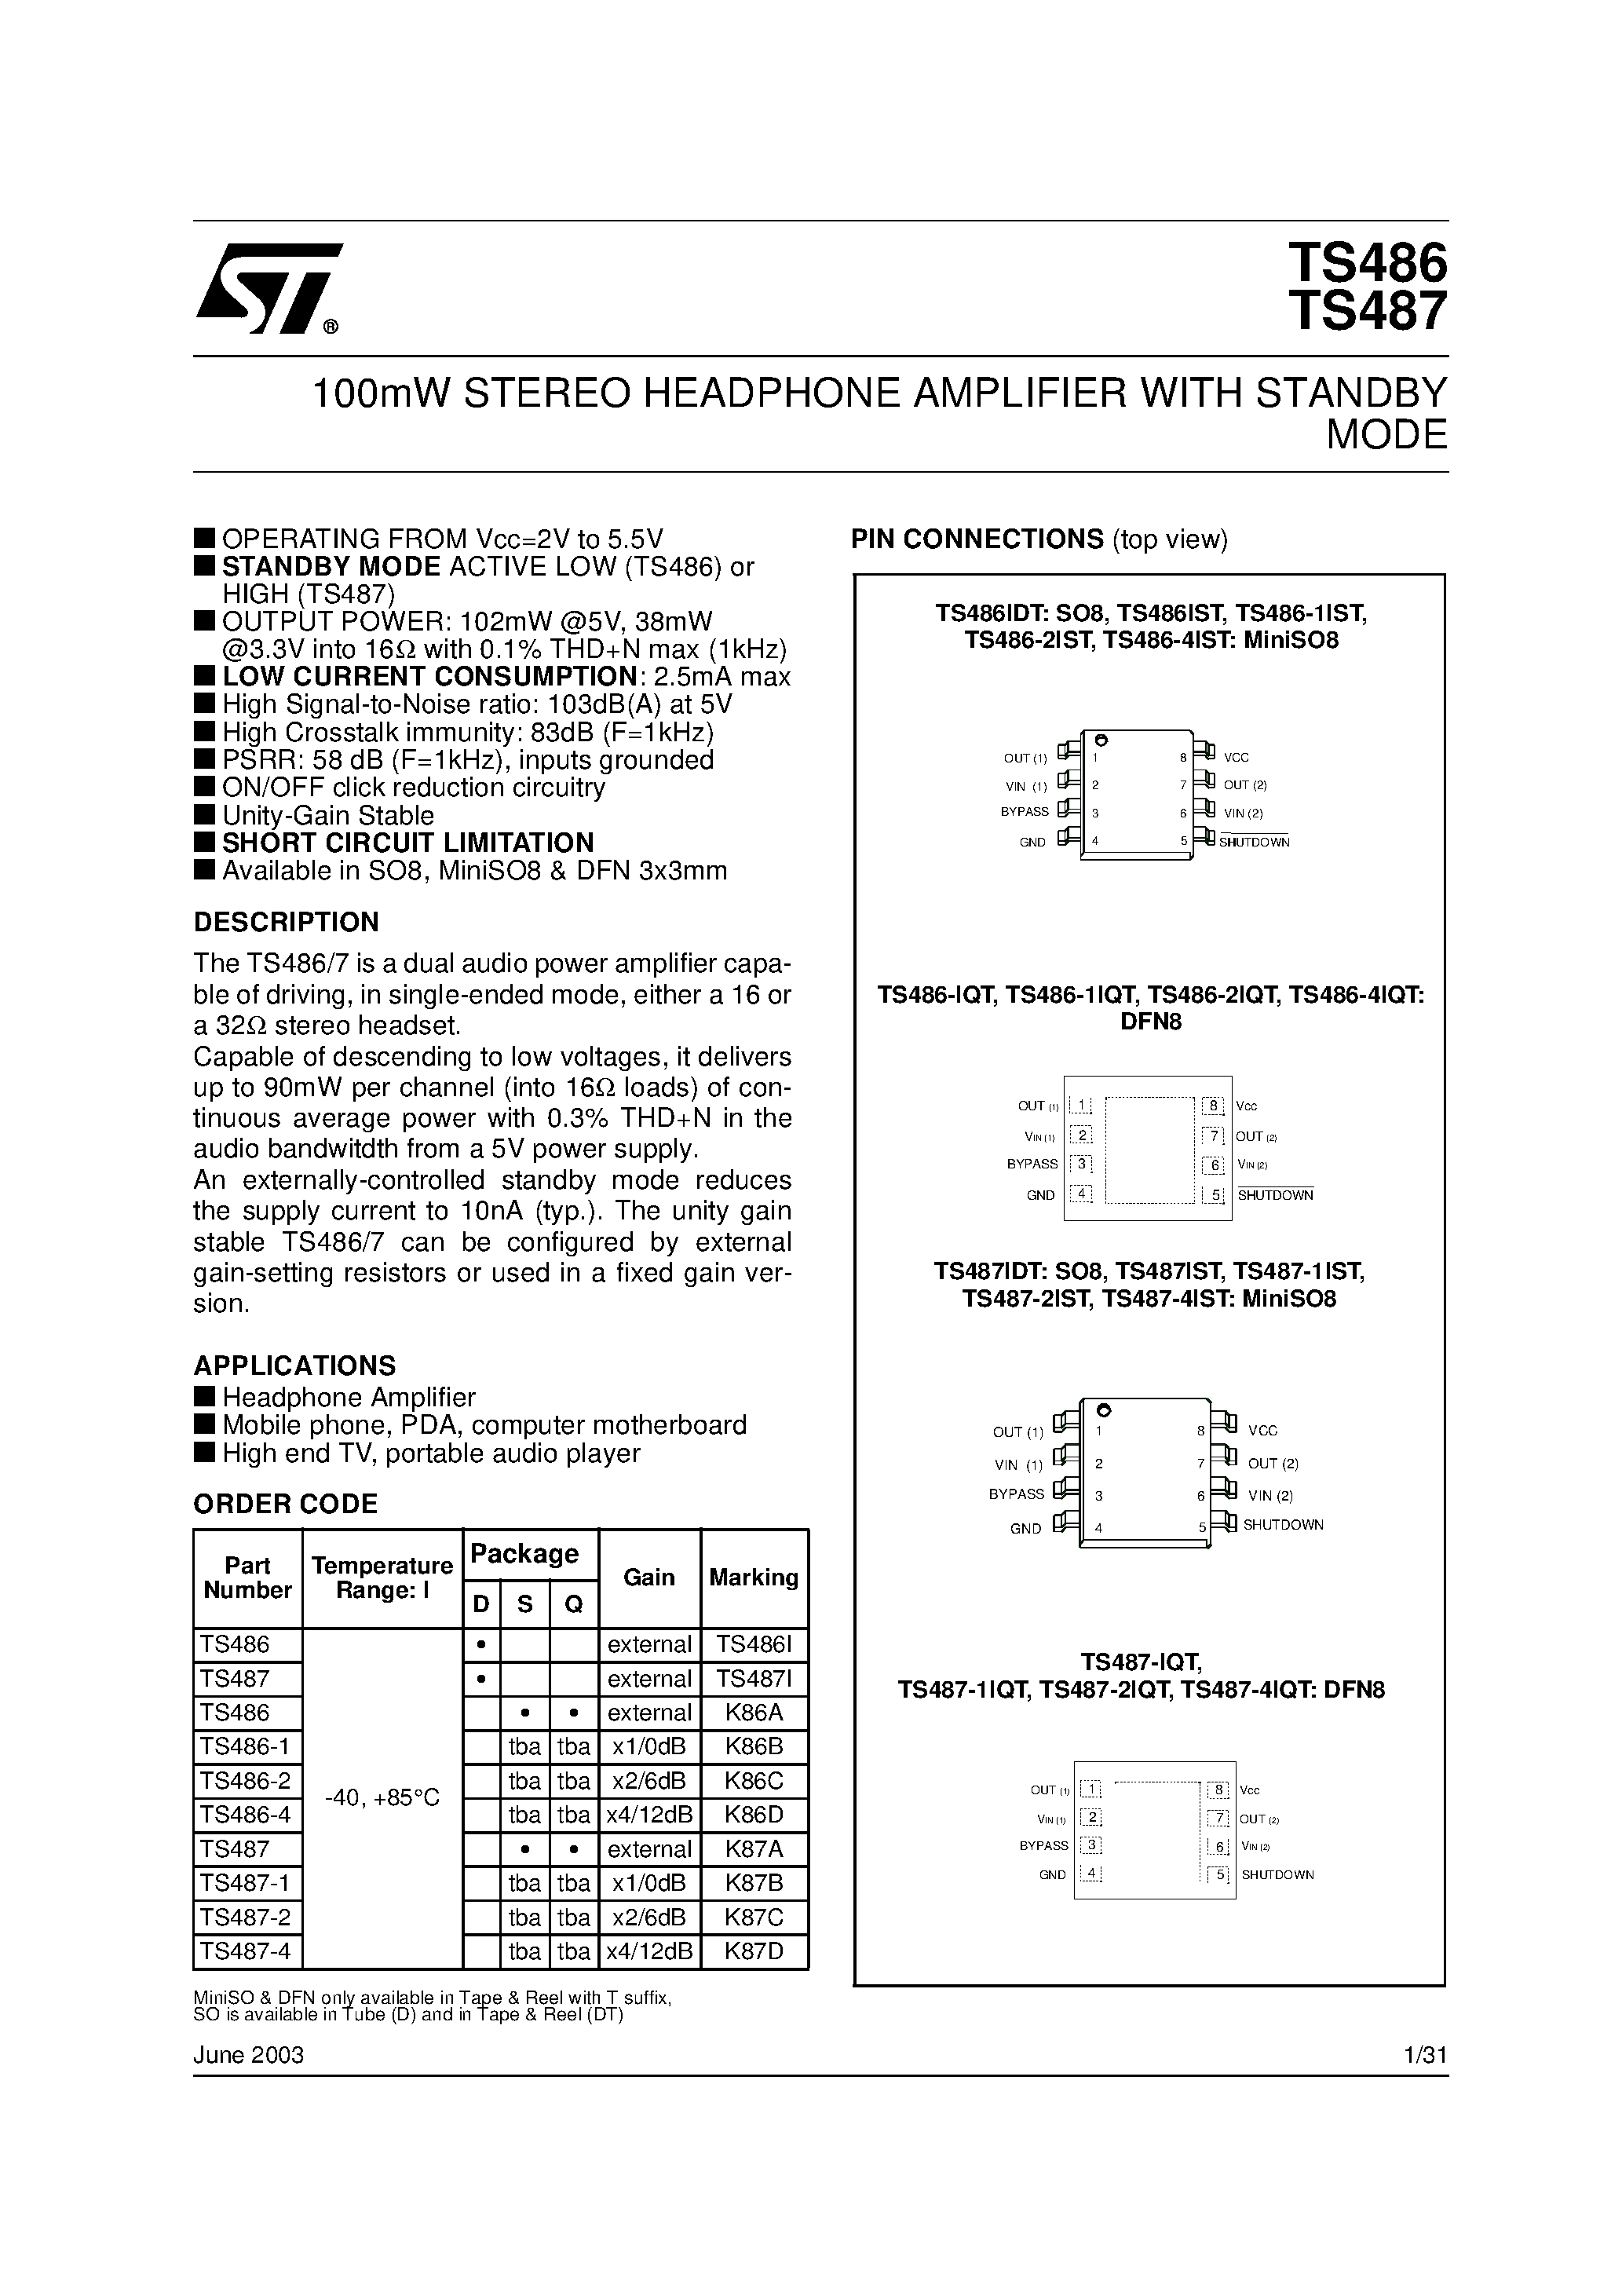 Datasheet TS486-1 - 100mW STEREO HEADPHONE AMPLIFIER WITH STANDBY MODE page 1